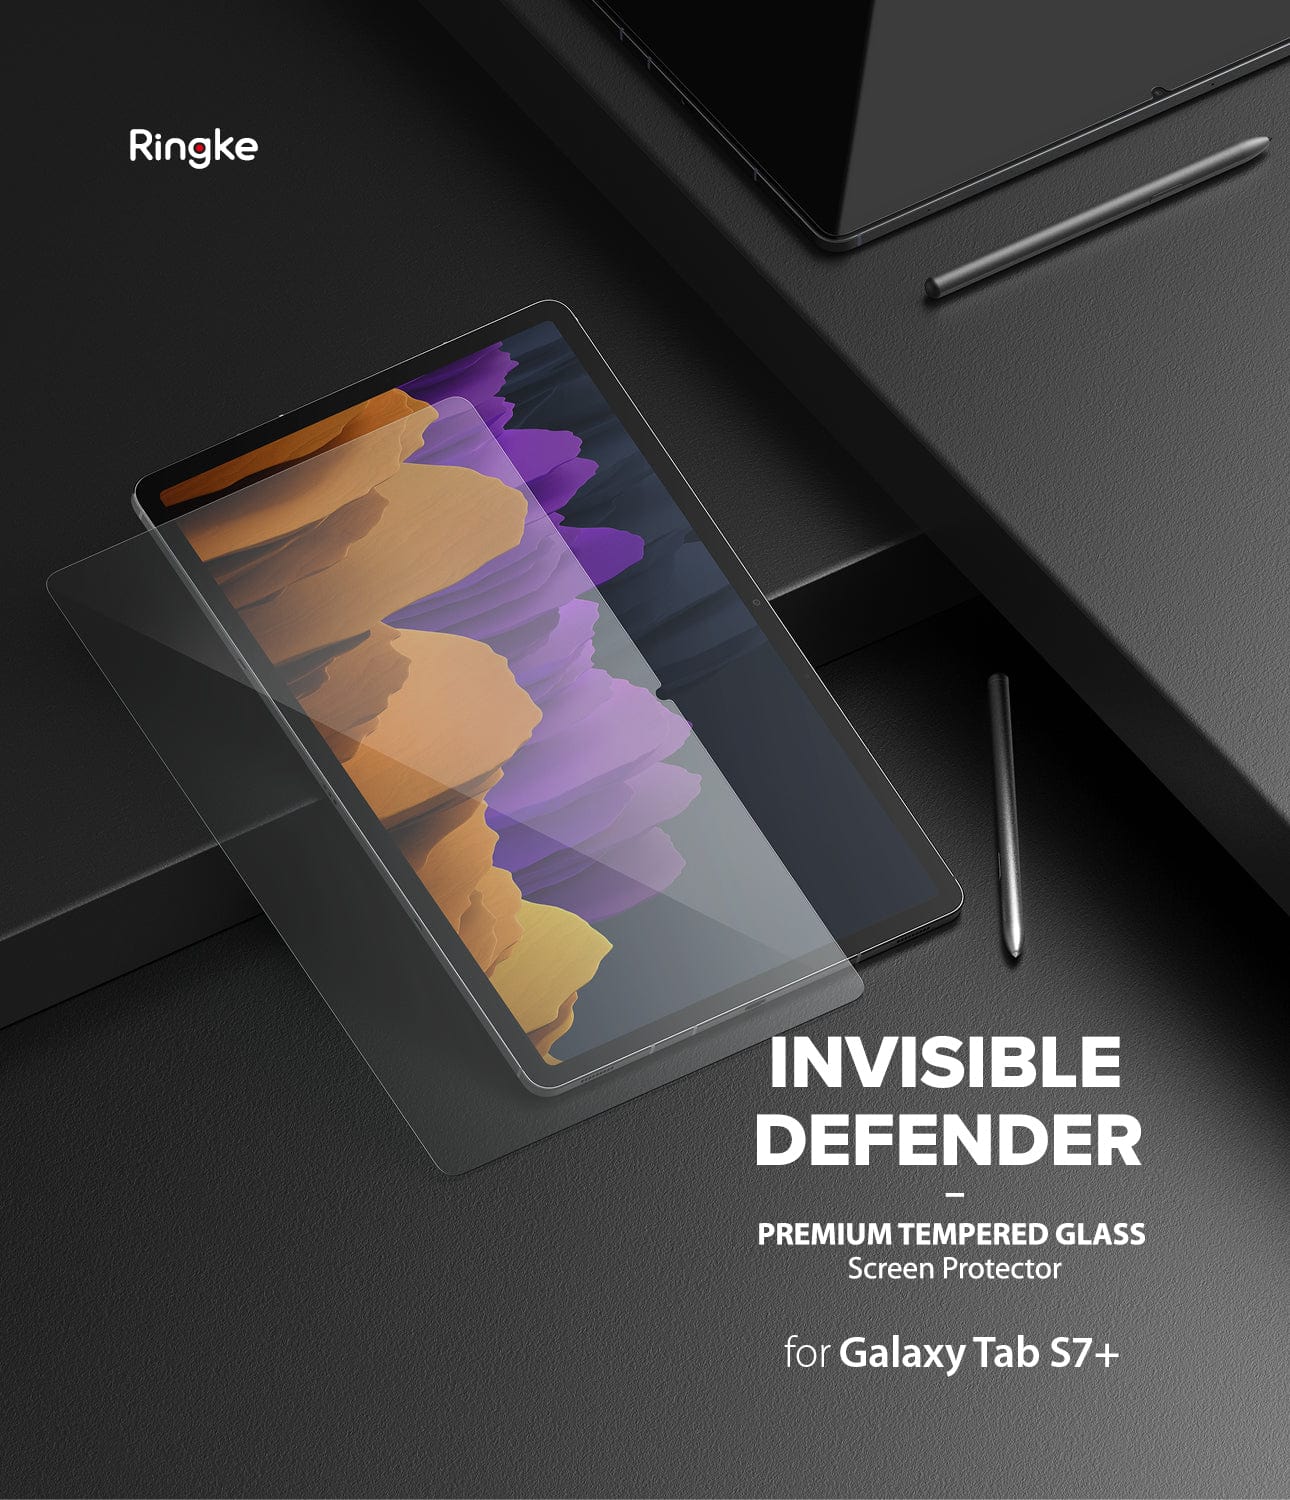 Premium Tempered Glass for Galaxy Tab S7+